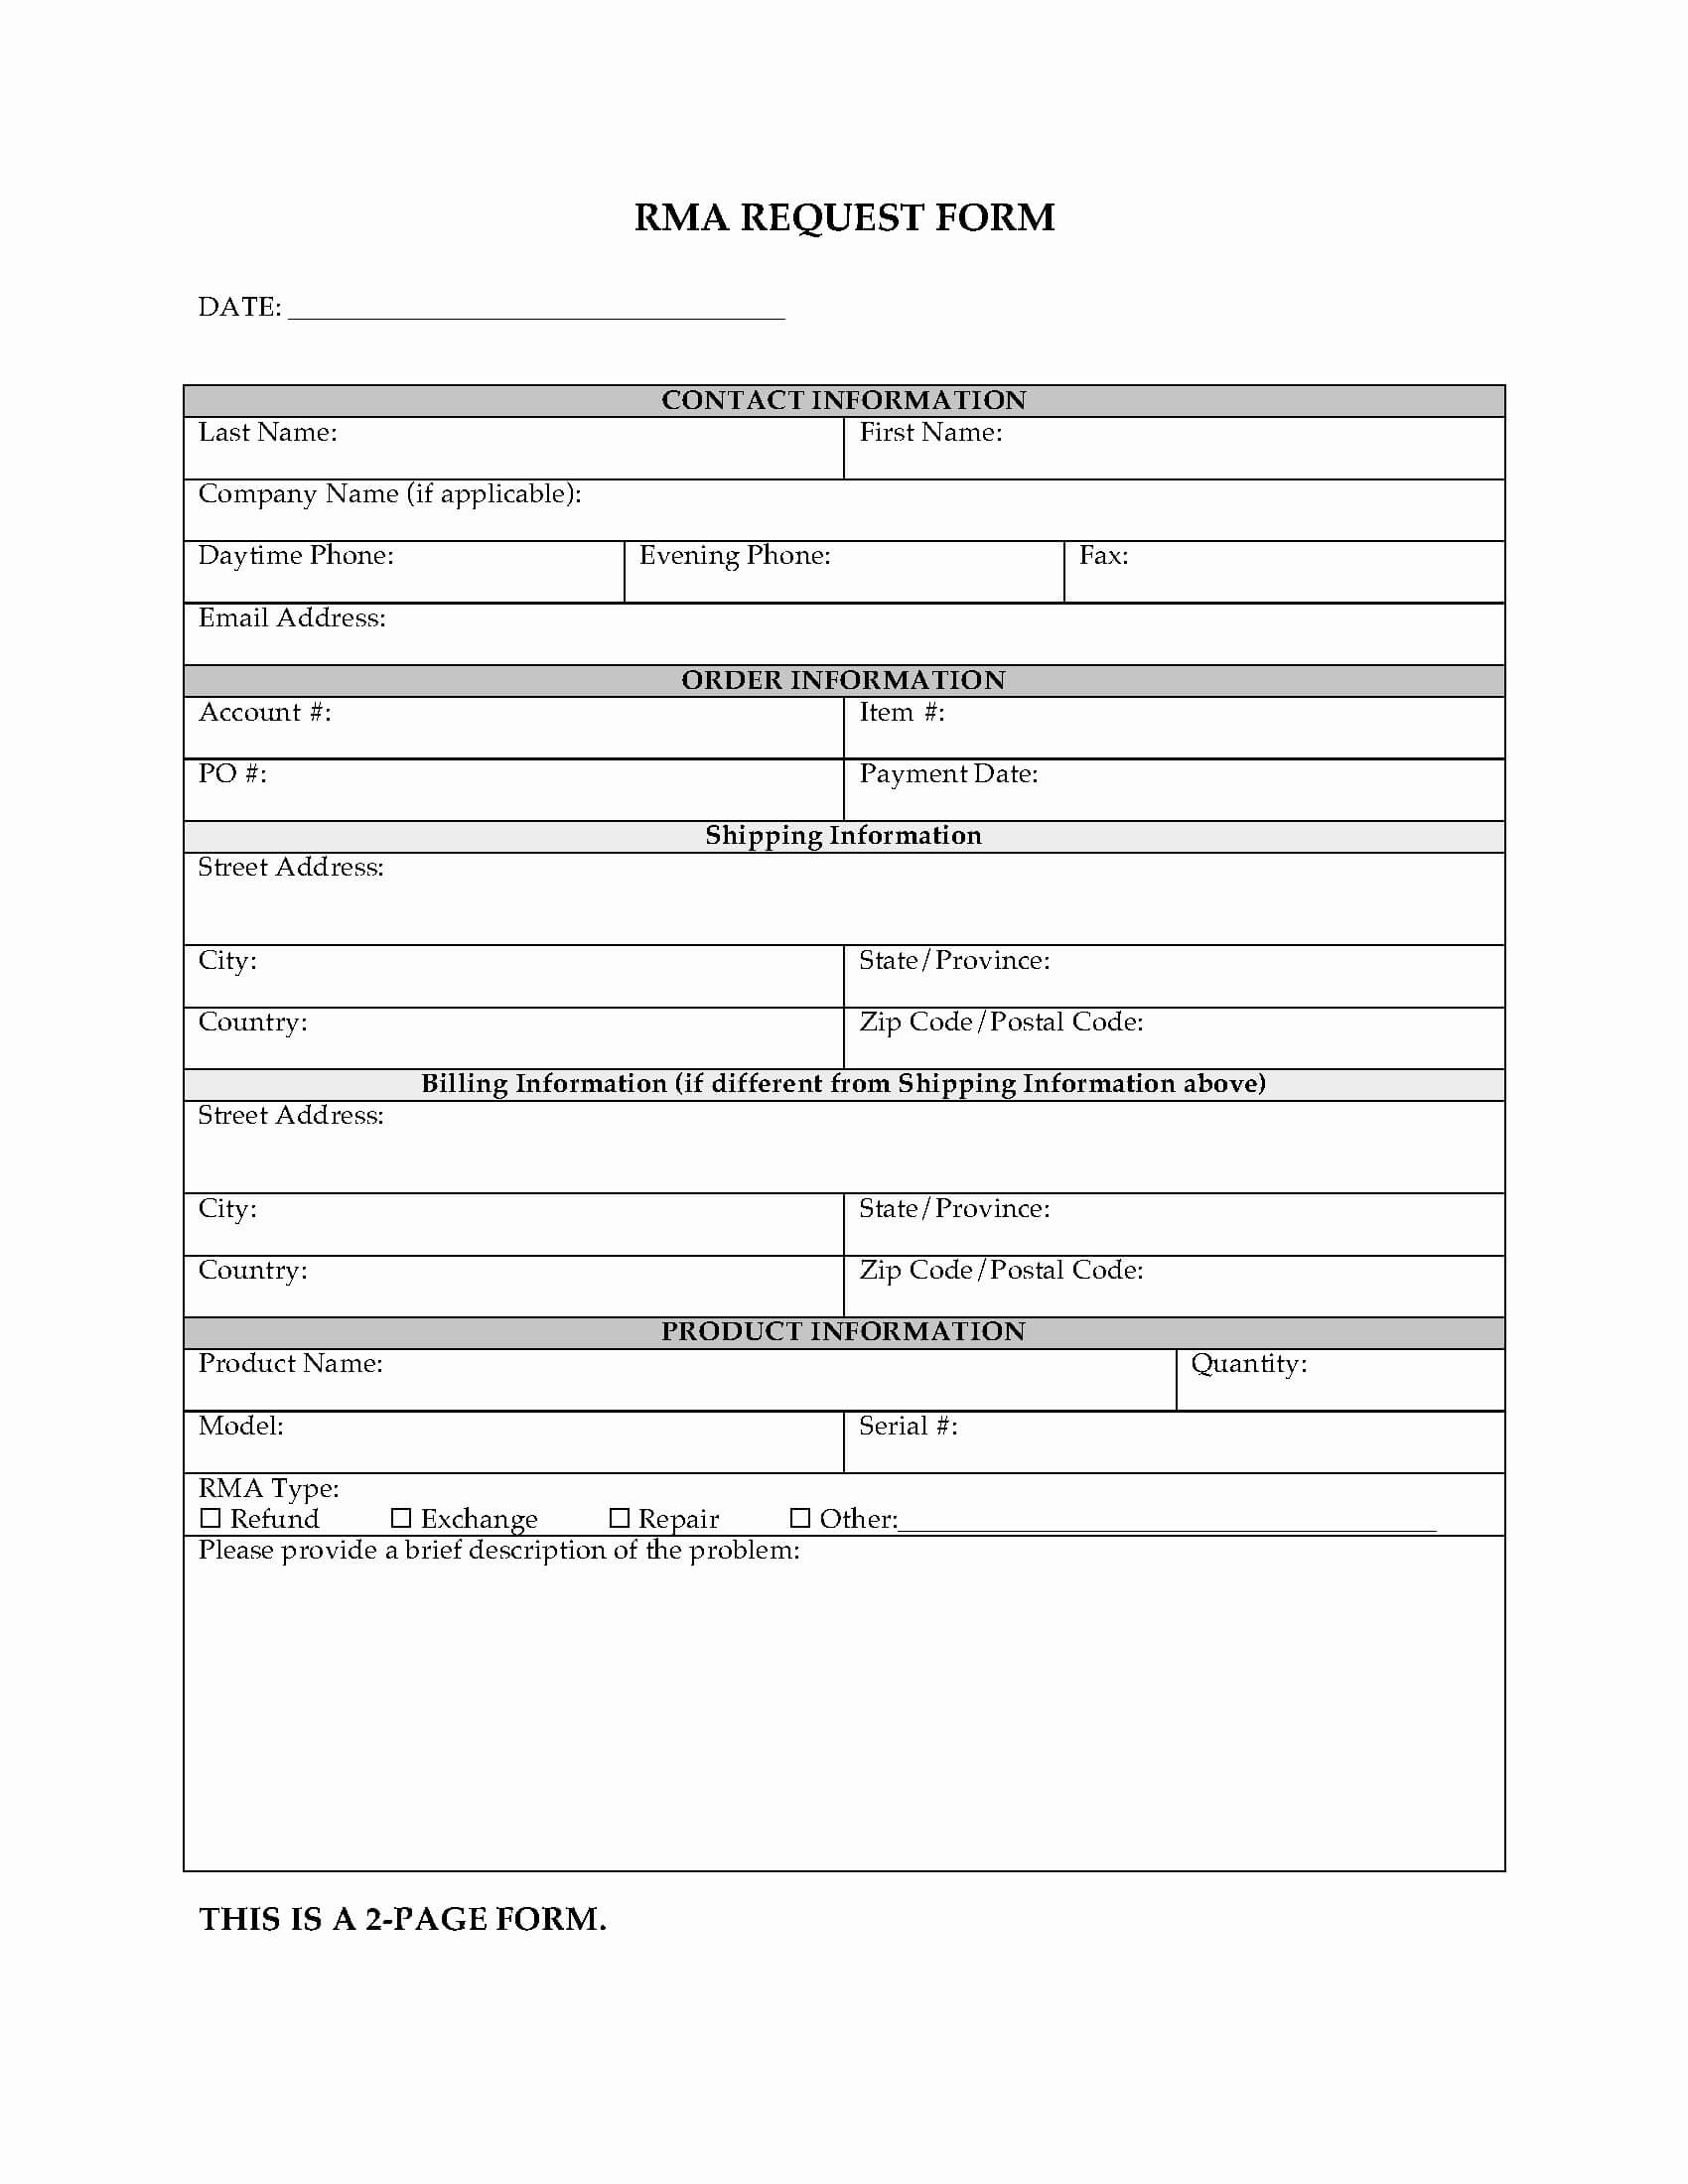 17 Return Form Template | Cgcprojects – Resume Inside Rma Report Template